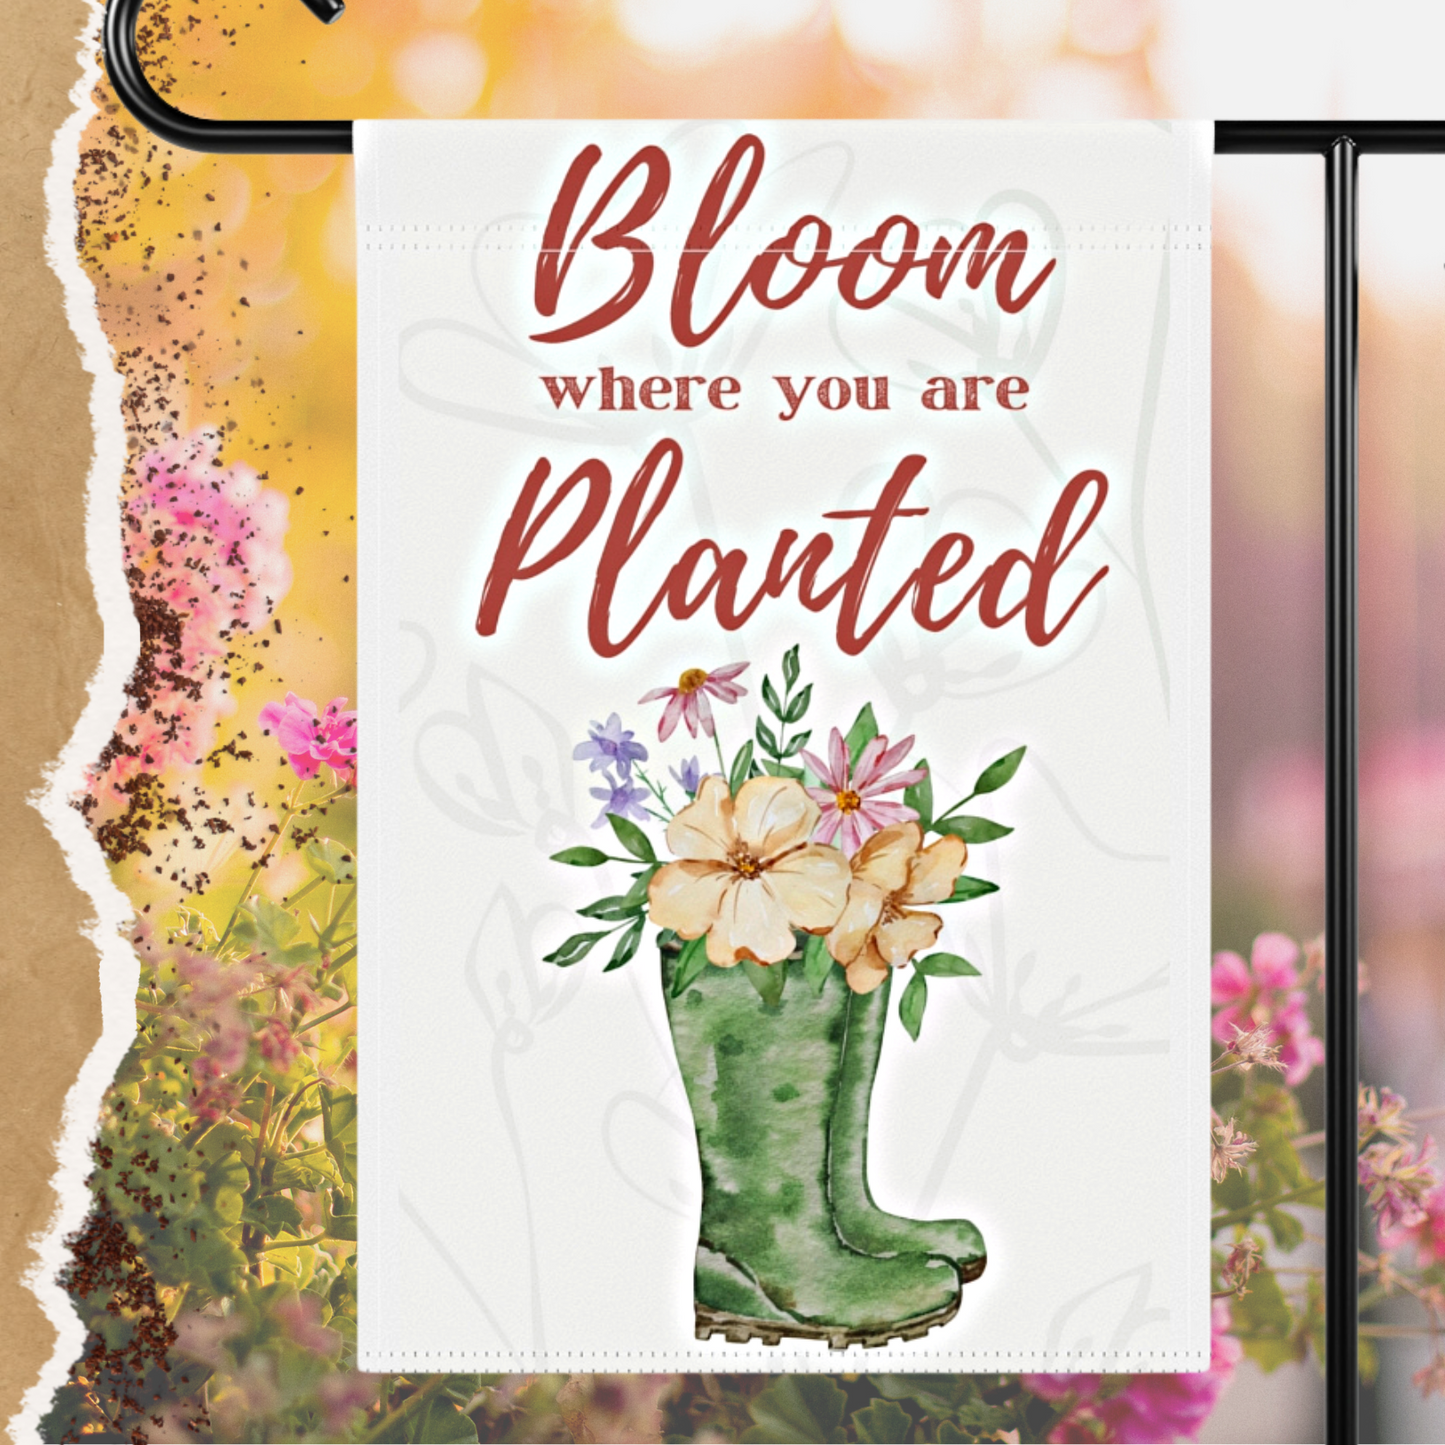 Bloom Where You Are Planted - Small Garden & House Banner Flag